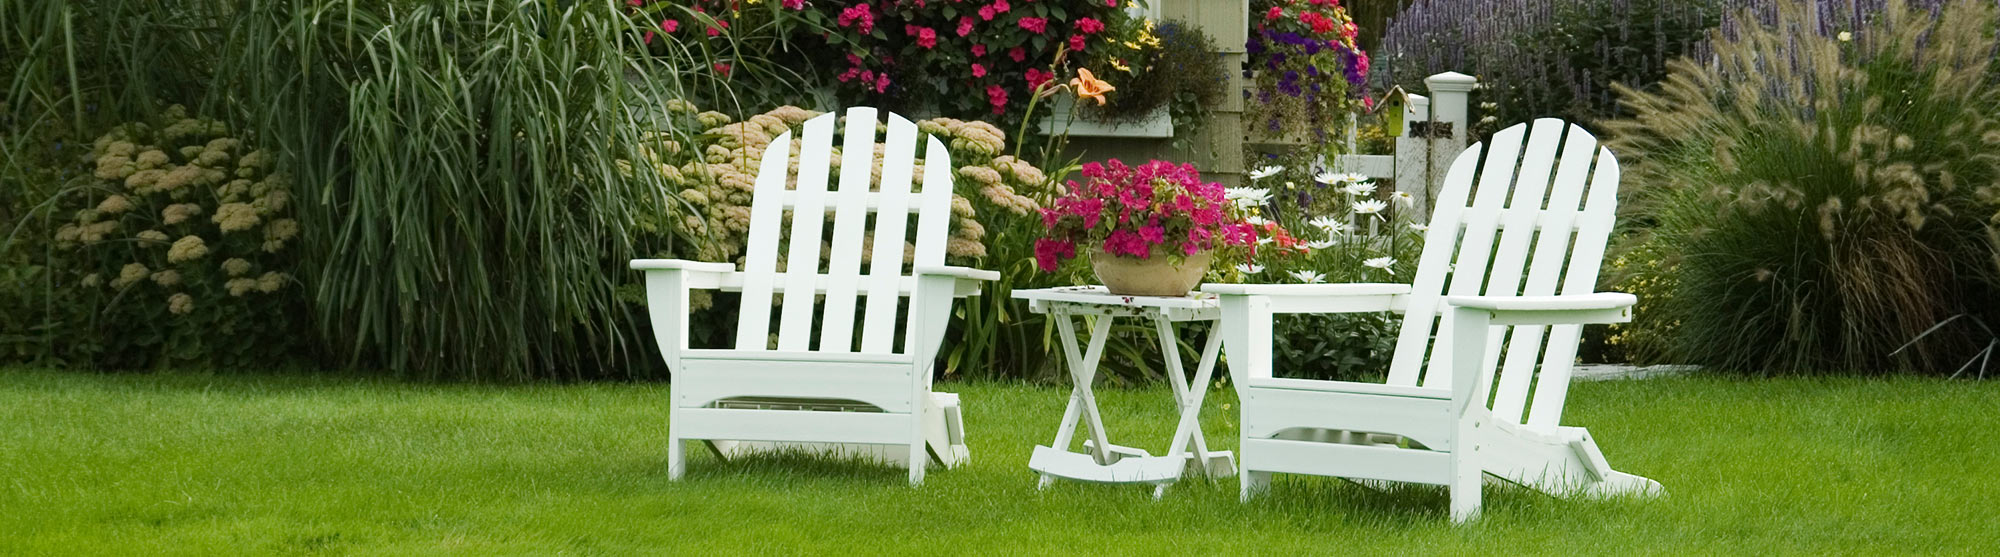 White chairs in yard